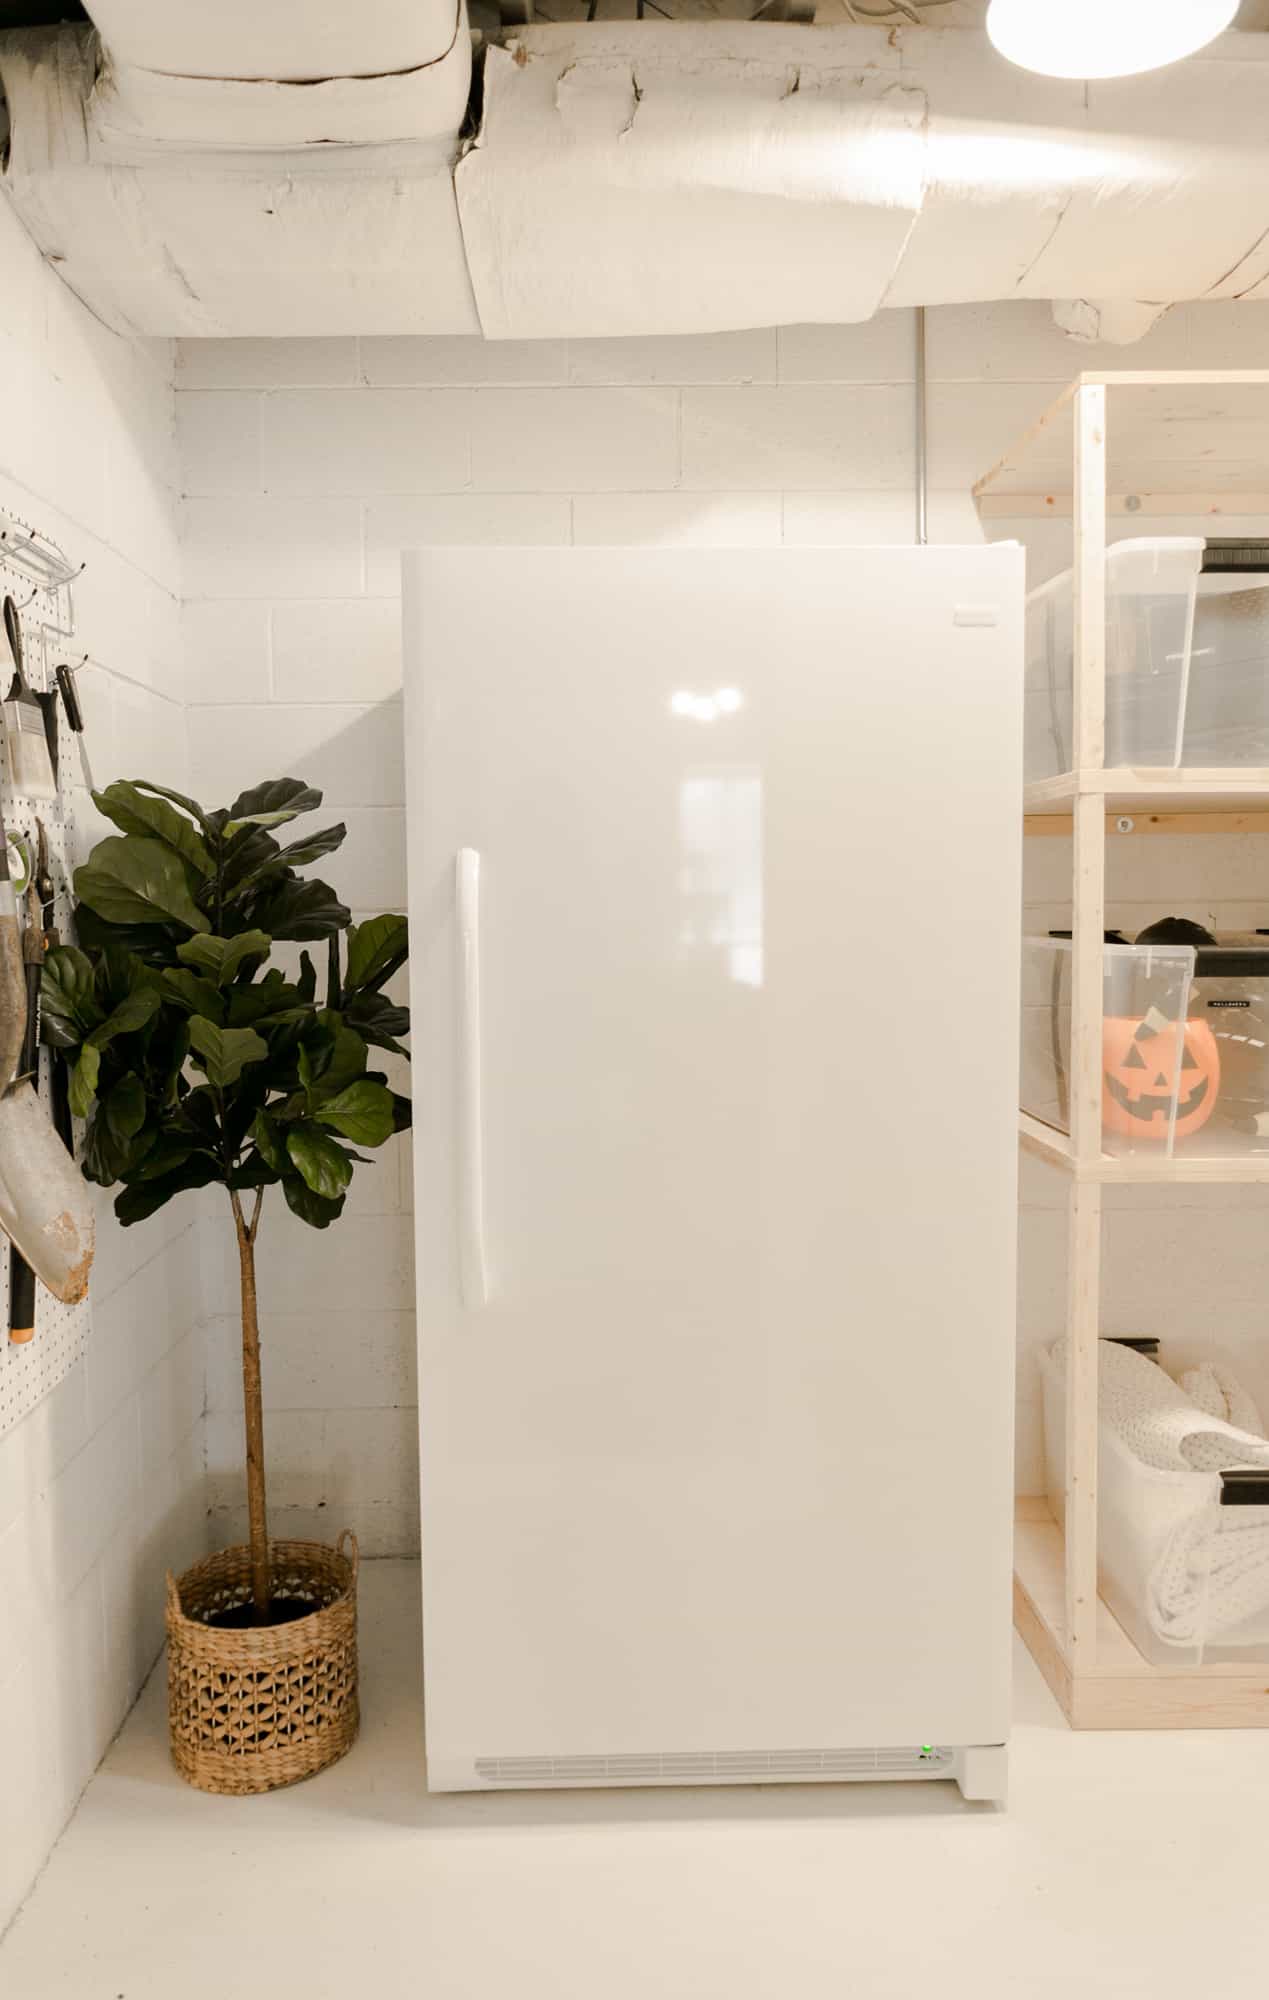 a white fridge by the shelves of clear bins with a potted plant next to it